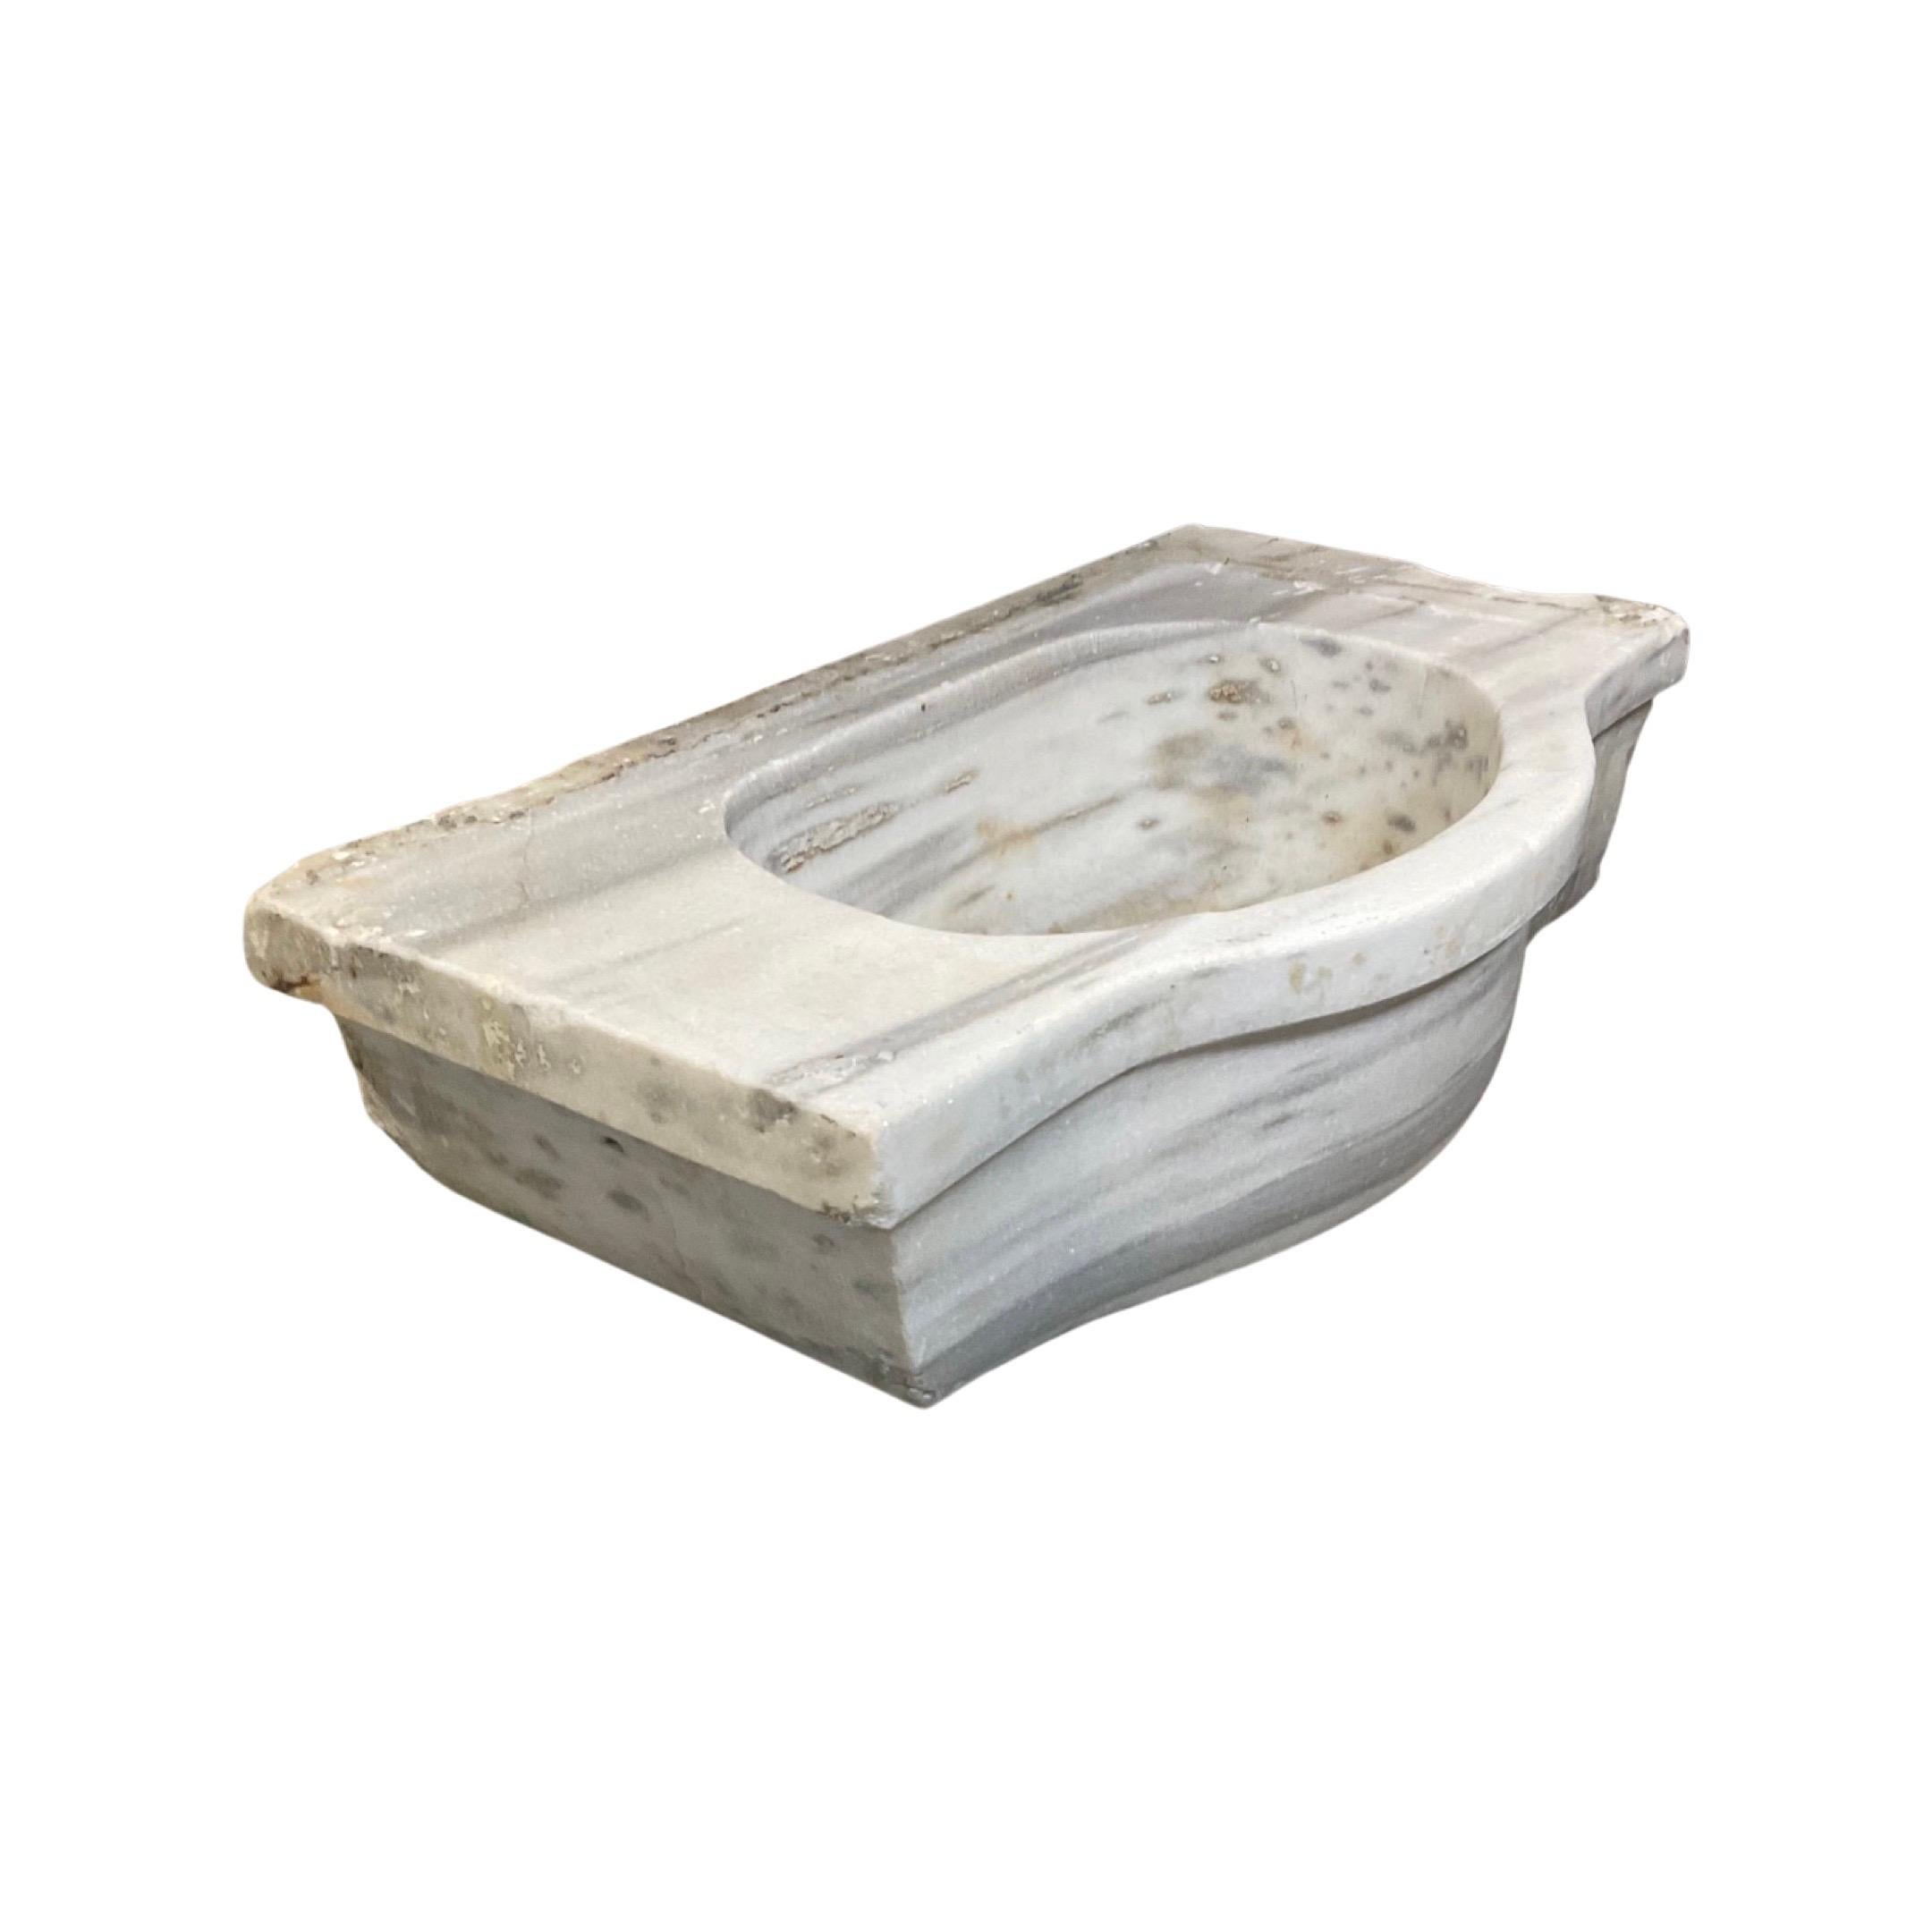 Experience luxurious old-world style with this beautiful 18th century French White Marble Sink. Expertly crafted from the highest-quality marble, this sink offers premium durability and timeless elegance. Add a touch of sophistication to your